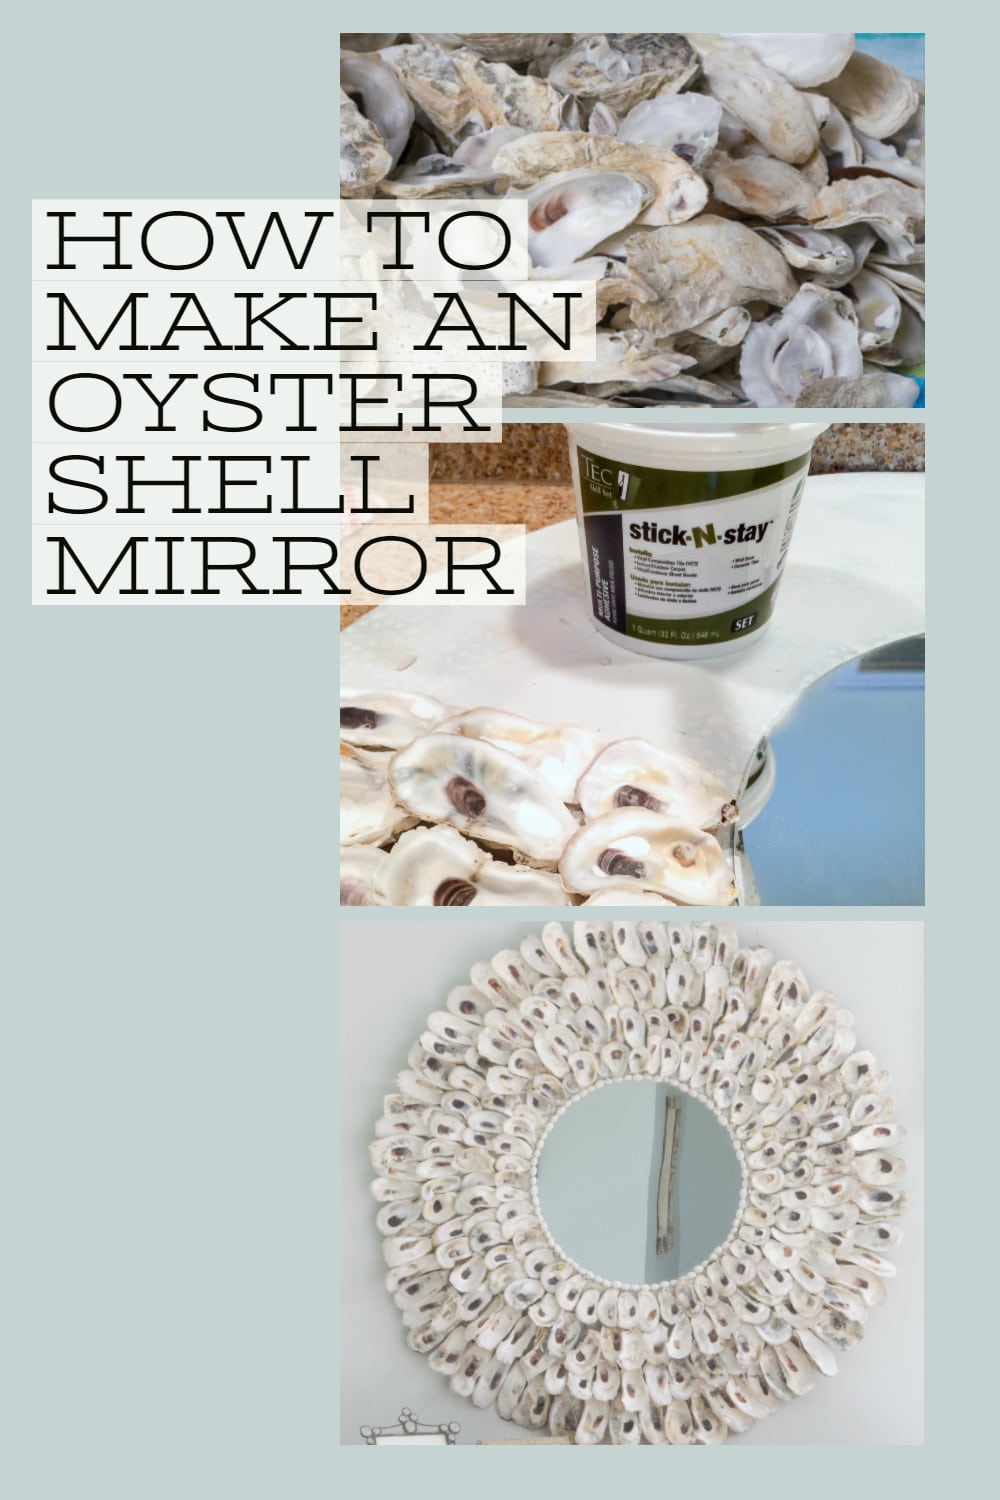 Oyster shell mirror and adhesive.